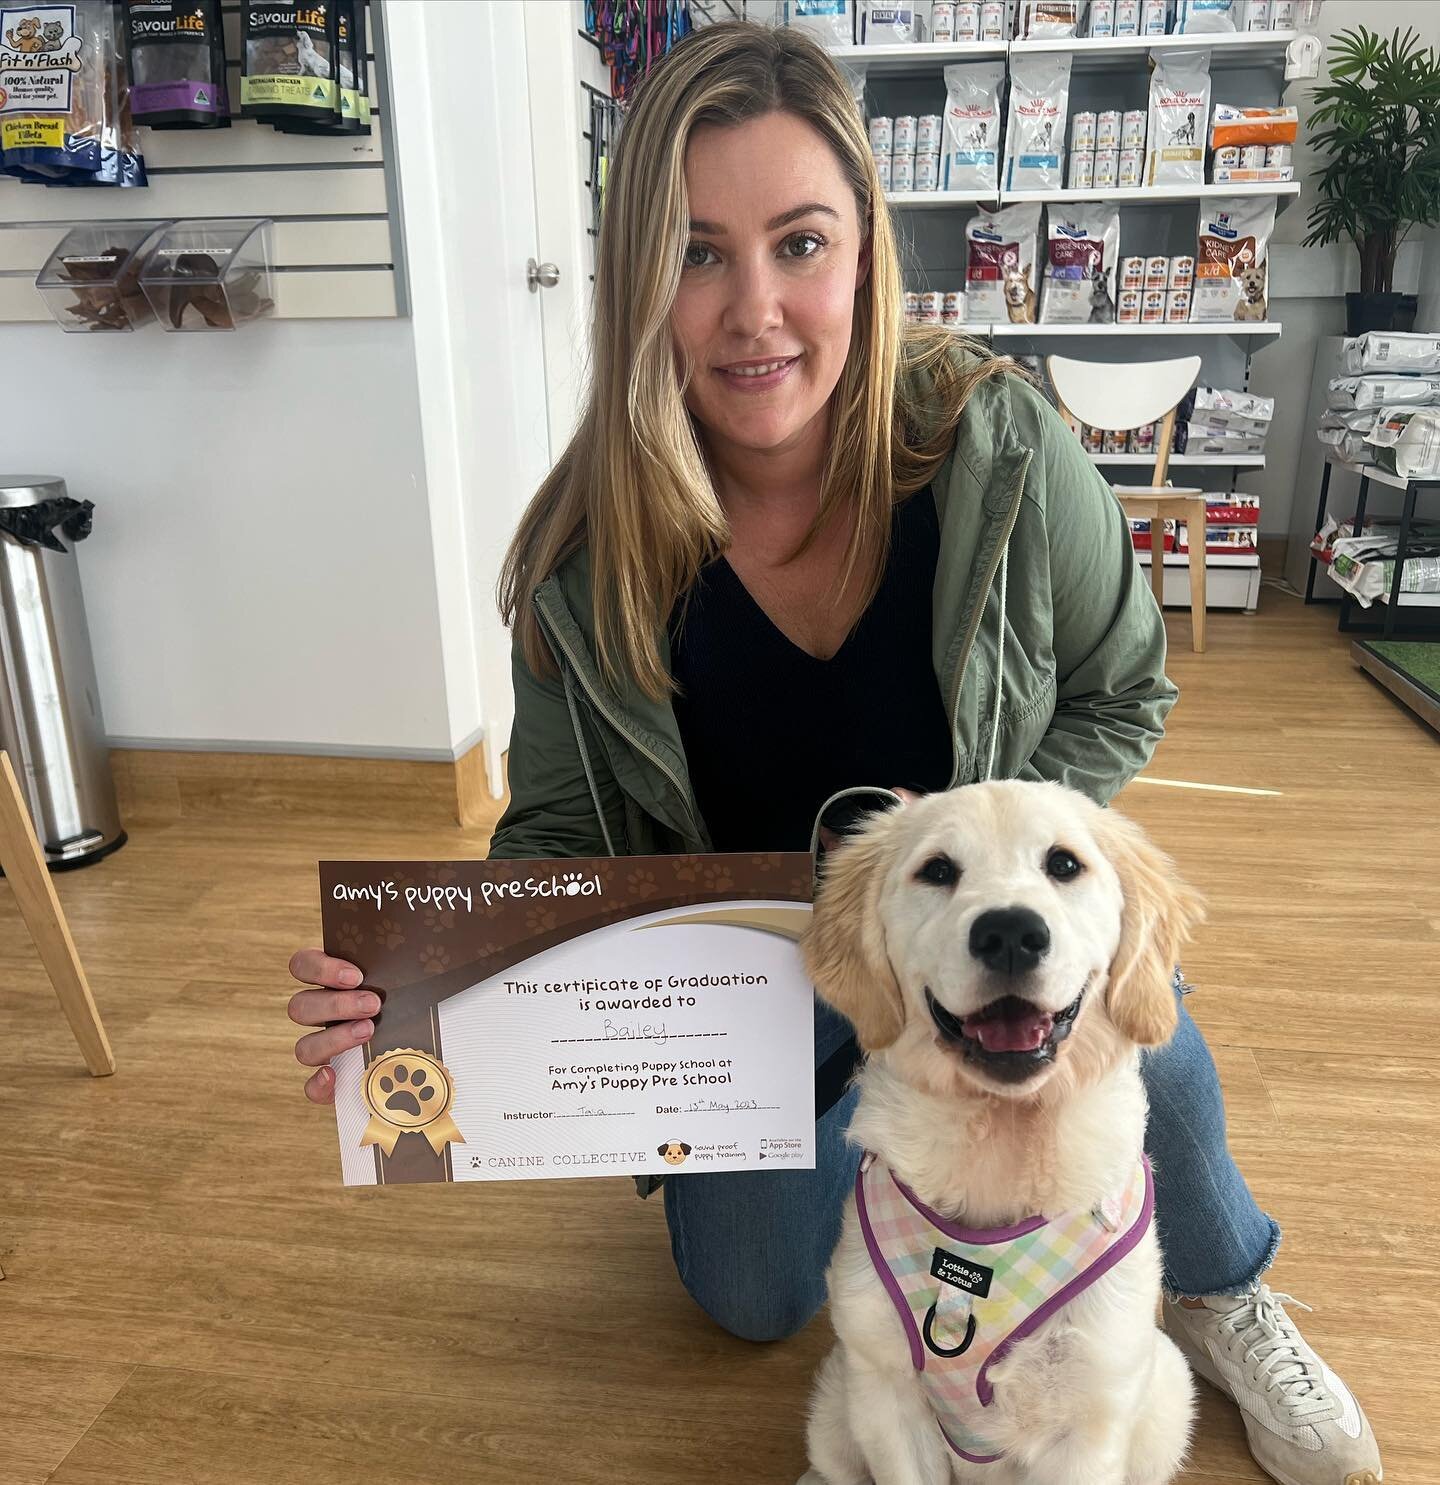 Bailey stoked to have graduated puppy class @bilgolavetclinic this afternoon 🎓